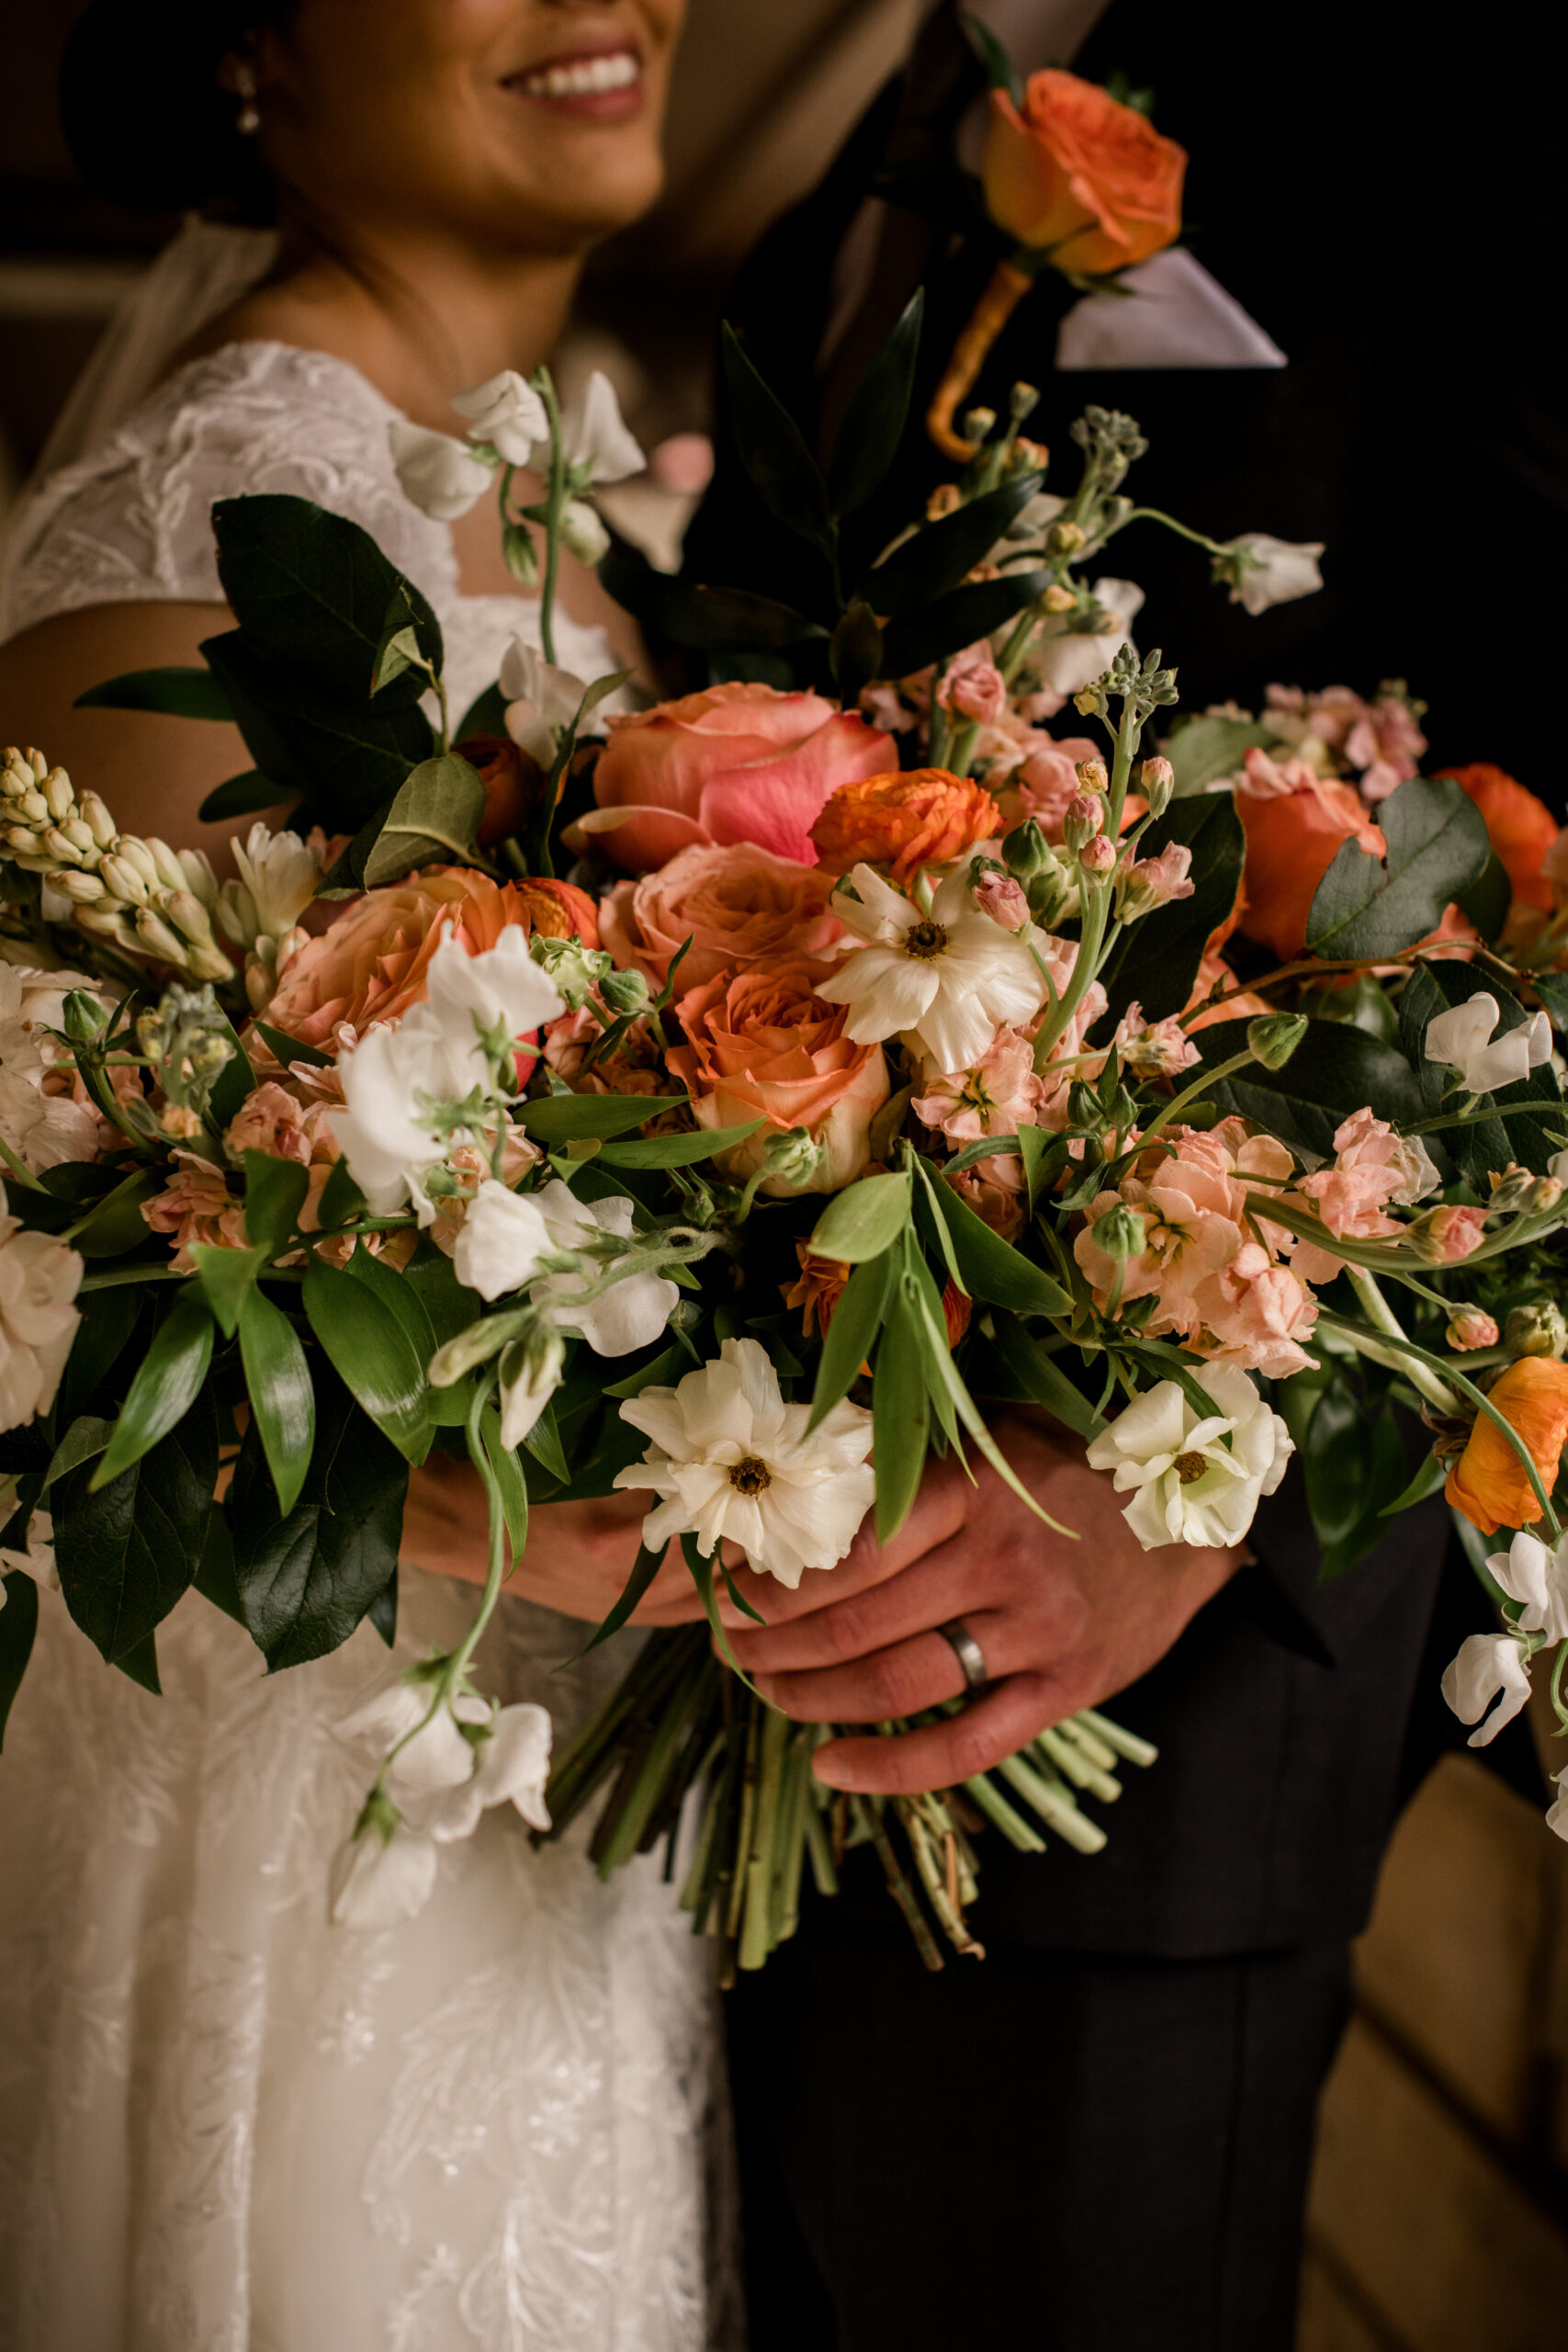 the groom is holding the bride's seasonal summer floral bouquet